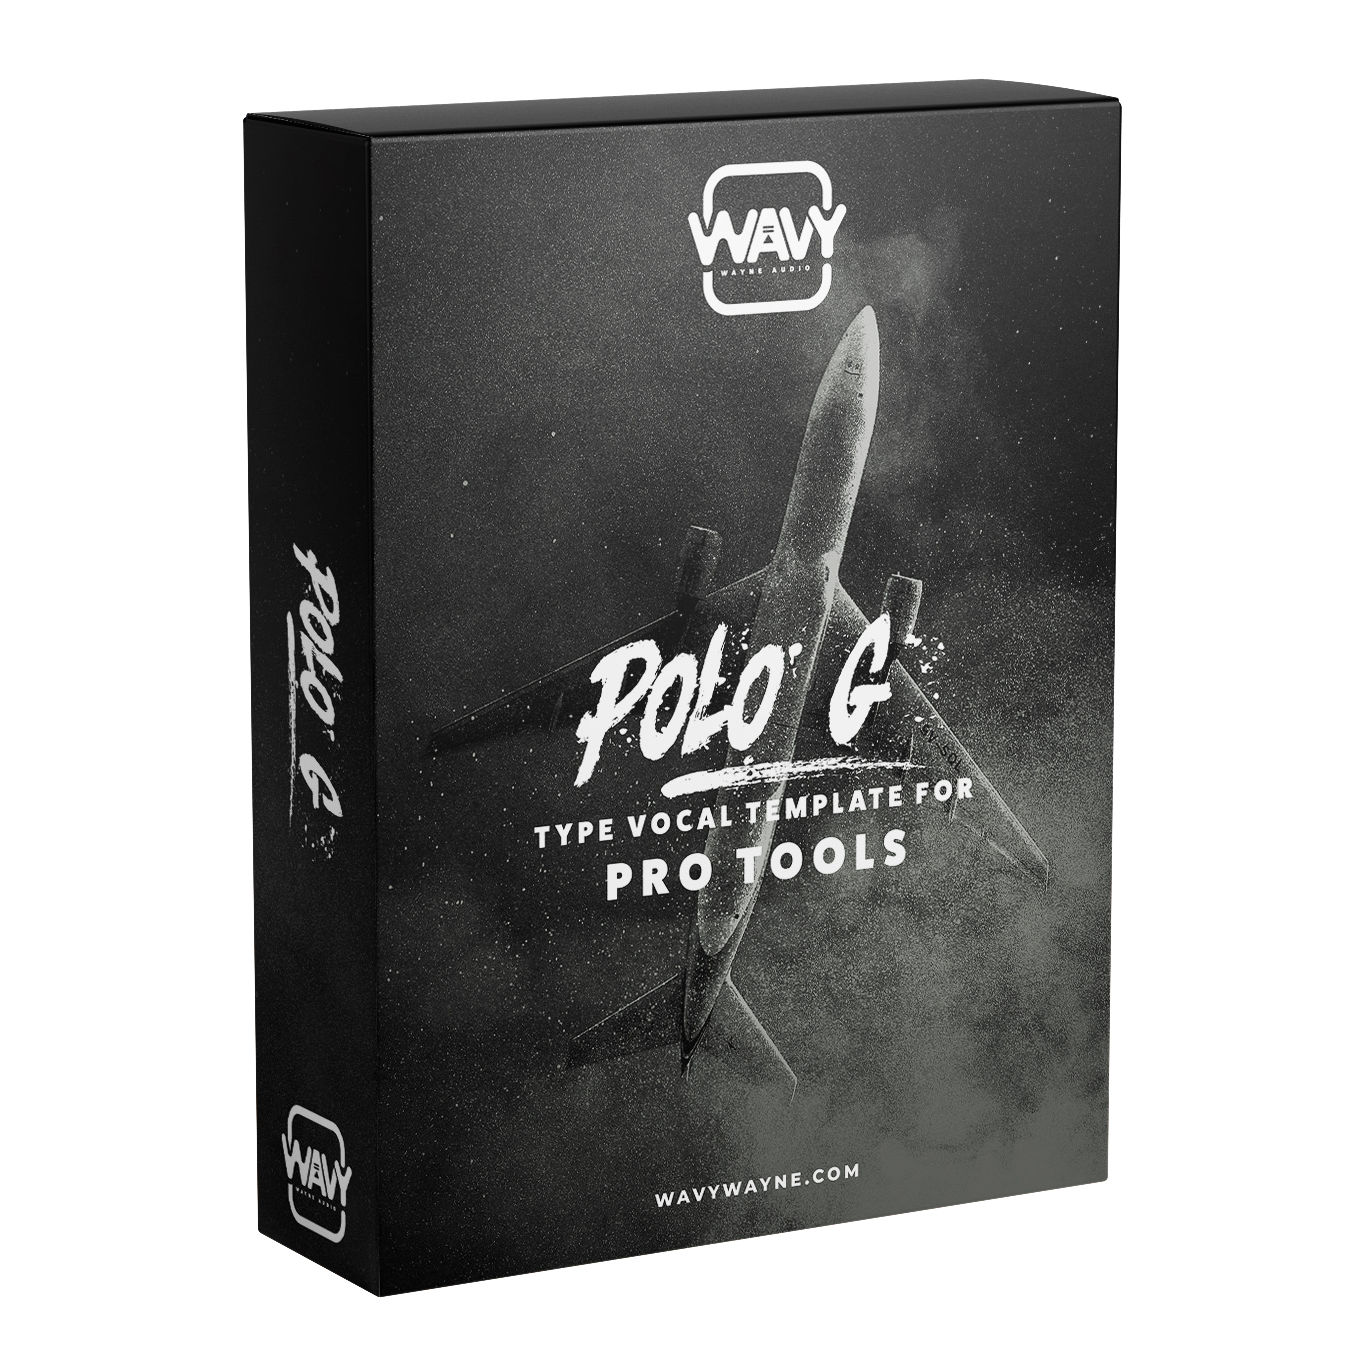 Polo G Type Template for Pro Tools